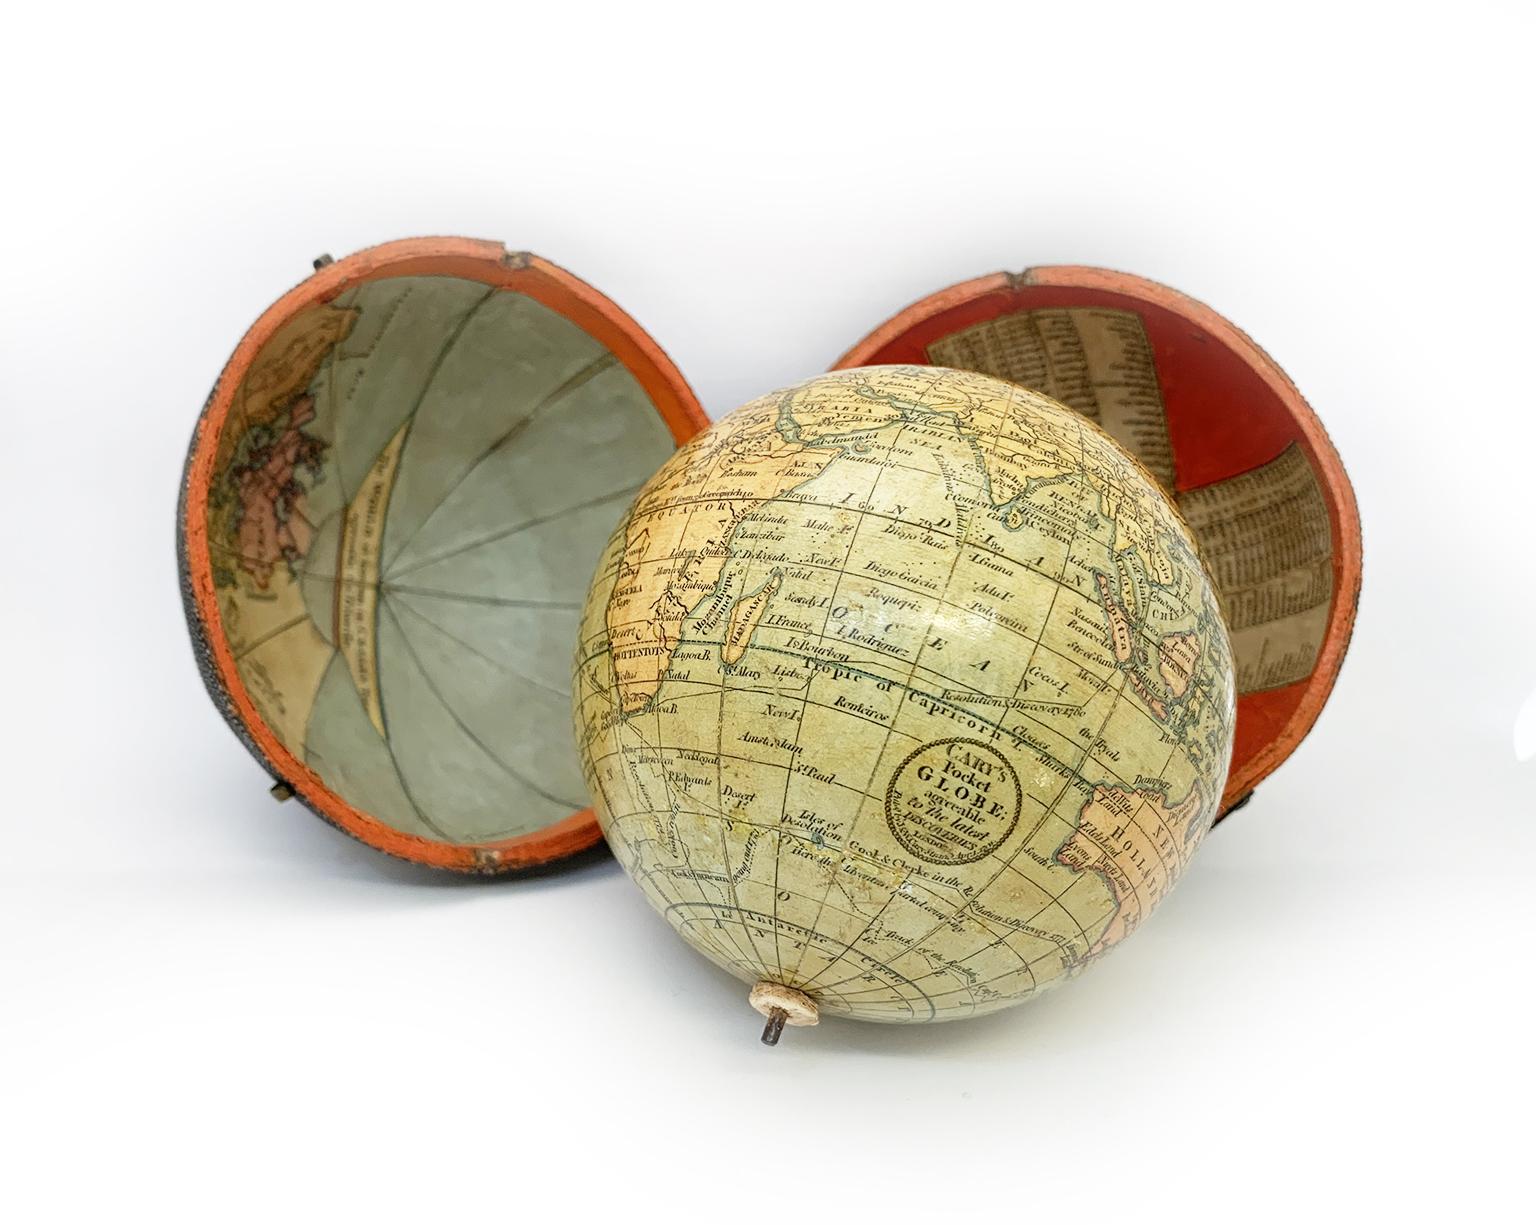 John and William Cary
Pocket globe
London, 1791

The pocket globe is contained in its original case, which itself is covered in shark skin.
Few and slight gaps in the original paint on the sphere.
It measures 3 in (7.70 cm) in diameter whereas